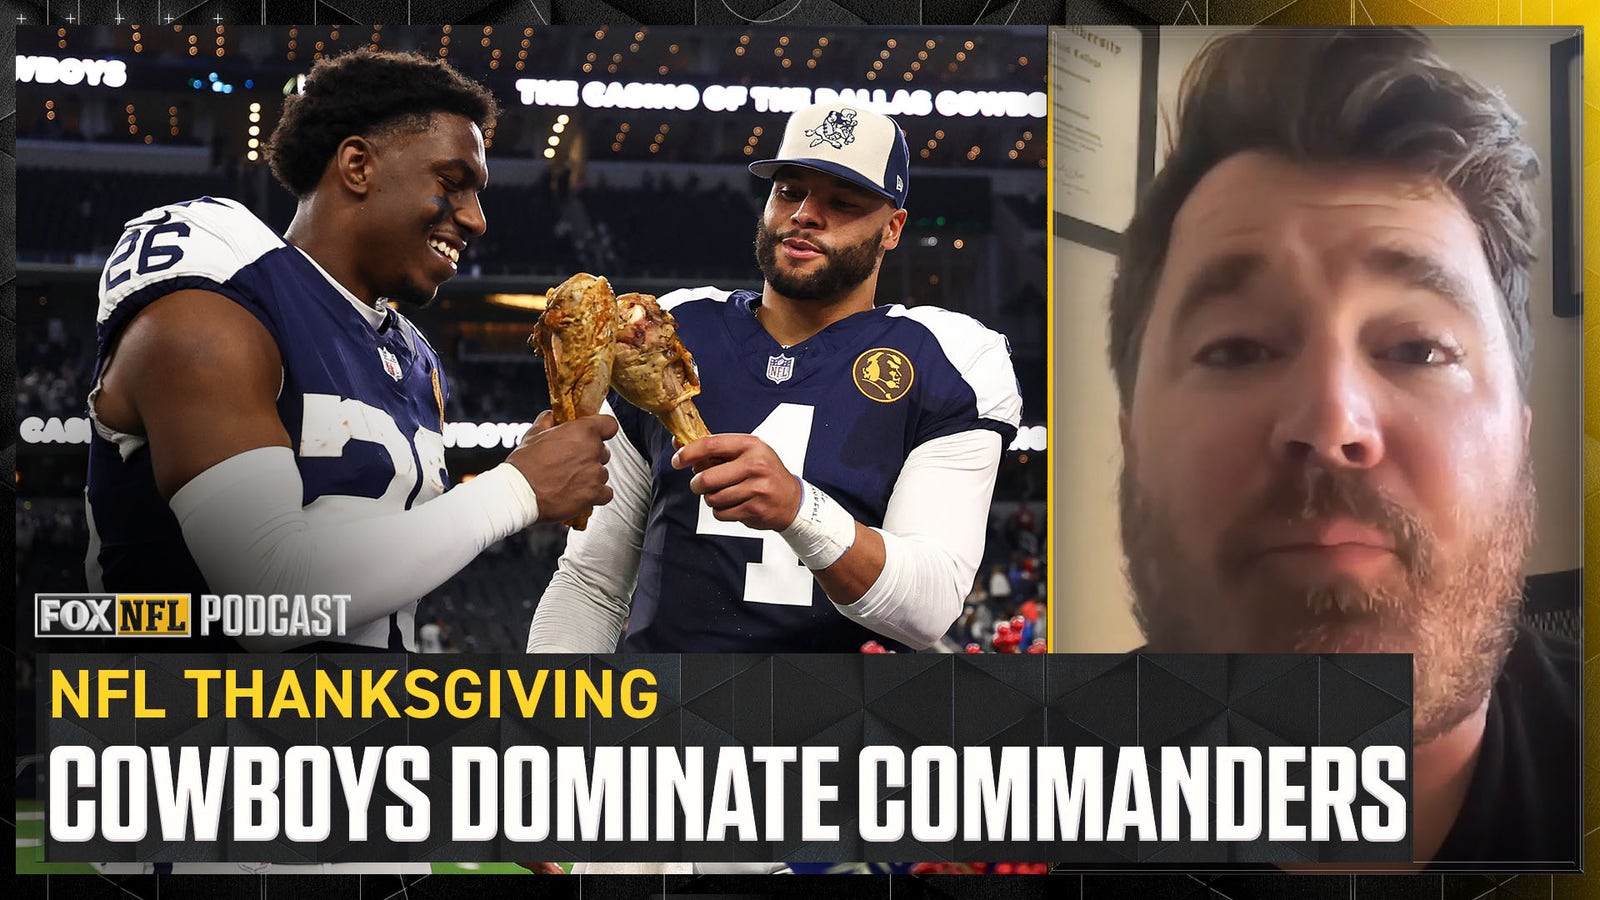 Dave Helman reacts to Cowboys' win on Thanksgiving 